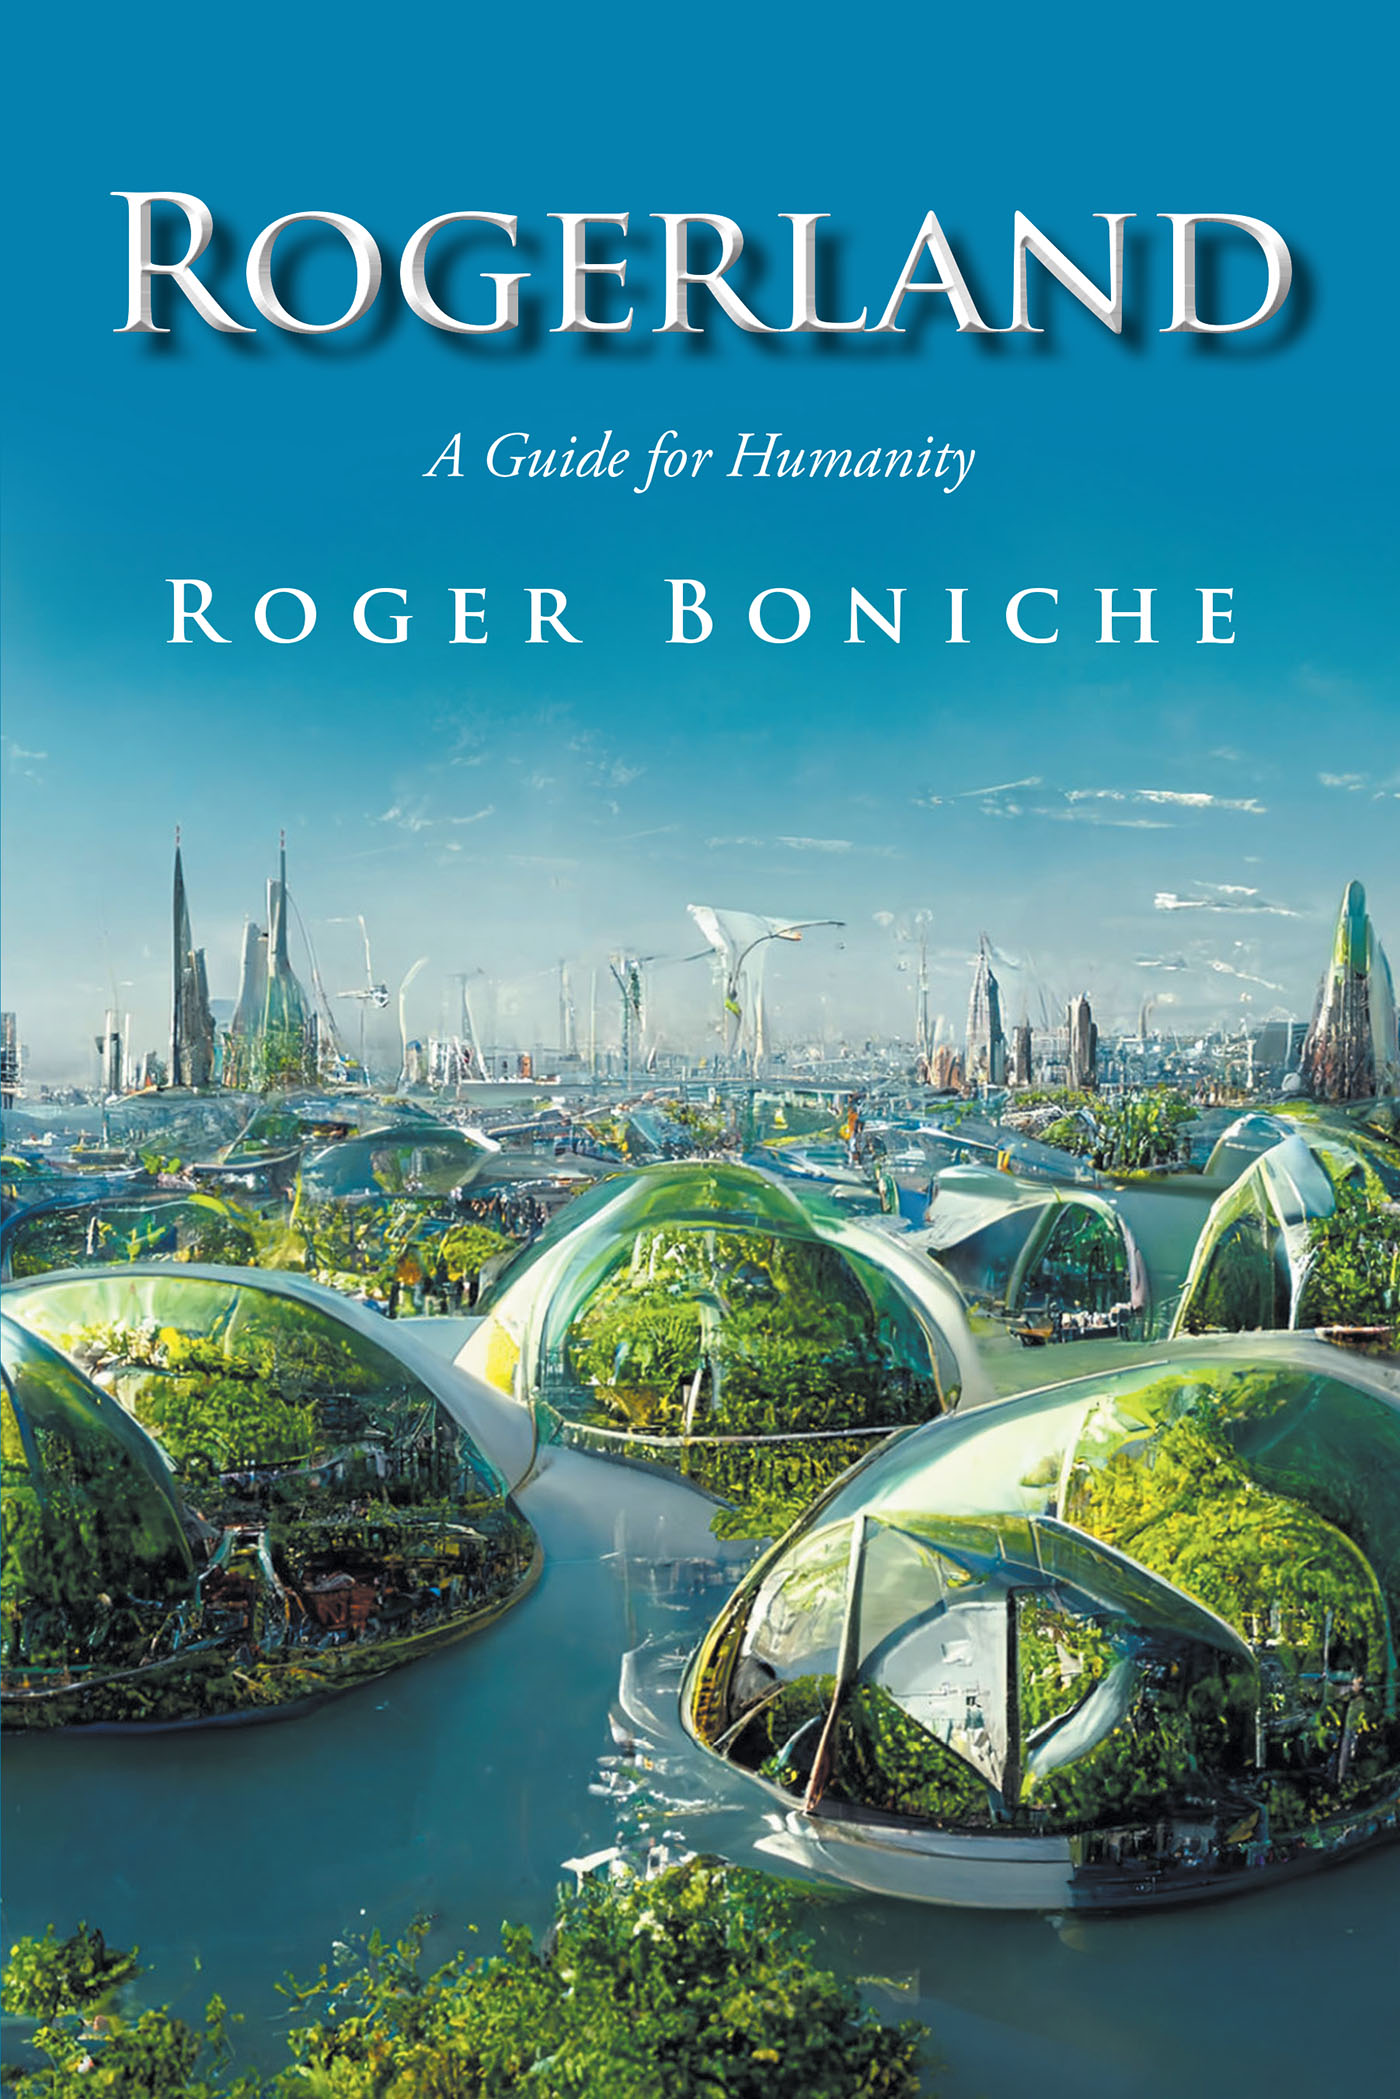 Roger Boniche’s Newly Released "Rogerland: A Guide for Humanity" is a Heartfelt Call to Action to Improve Society and Heal the World